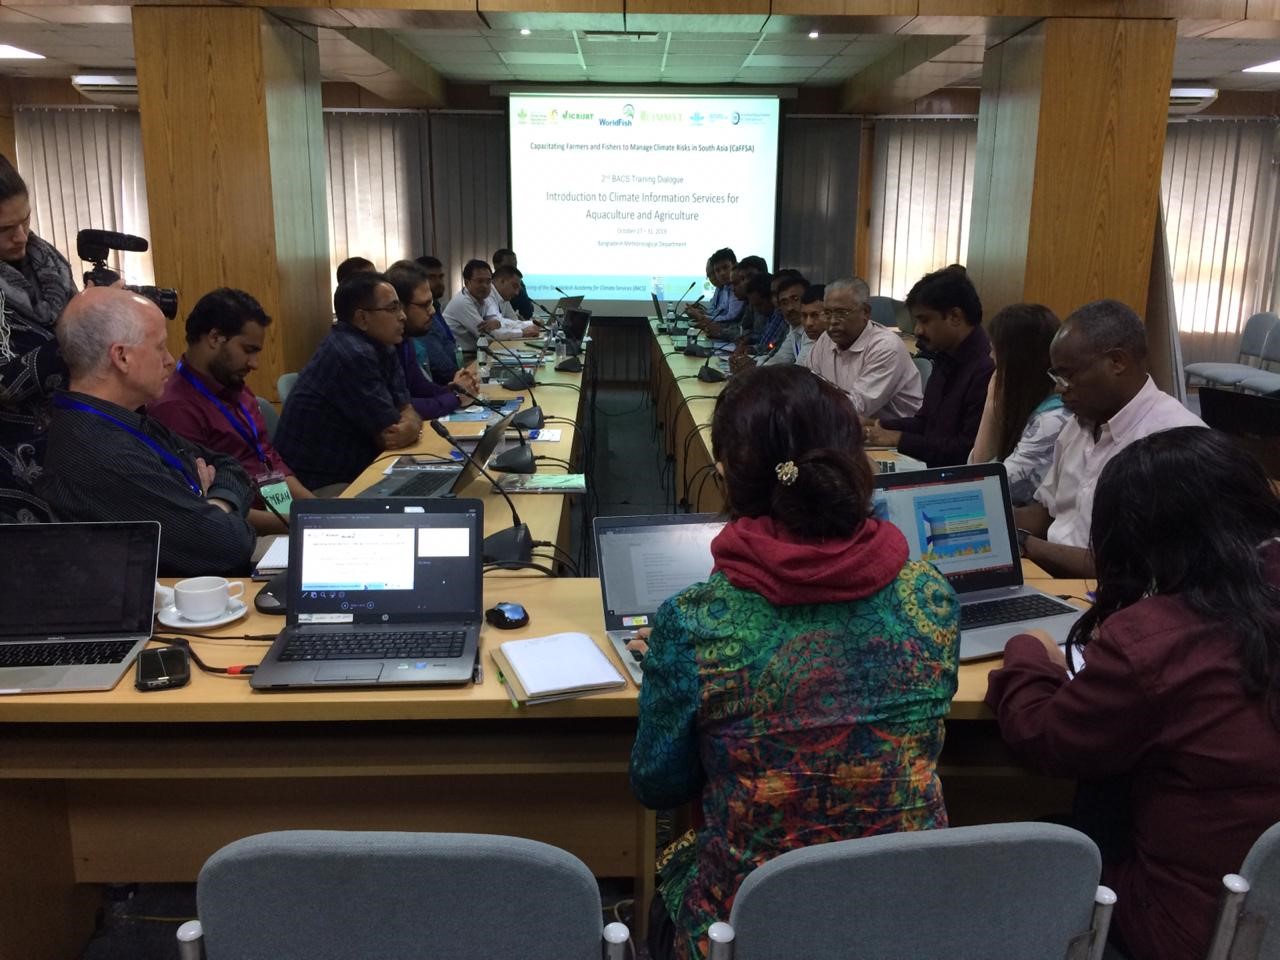 A training dialogue on Climate Information Services for Aquaculture in Bangladesh has shown immense potential in enhancing climate risk management. Photo by Jacquelyn Elise Turner.